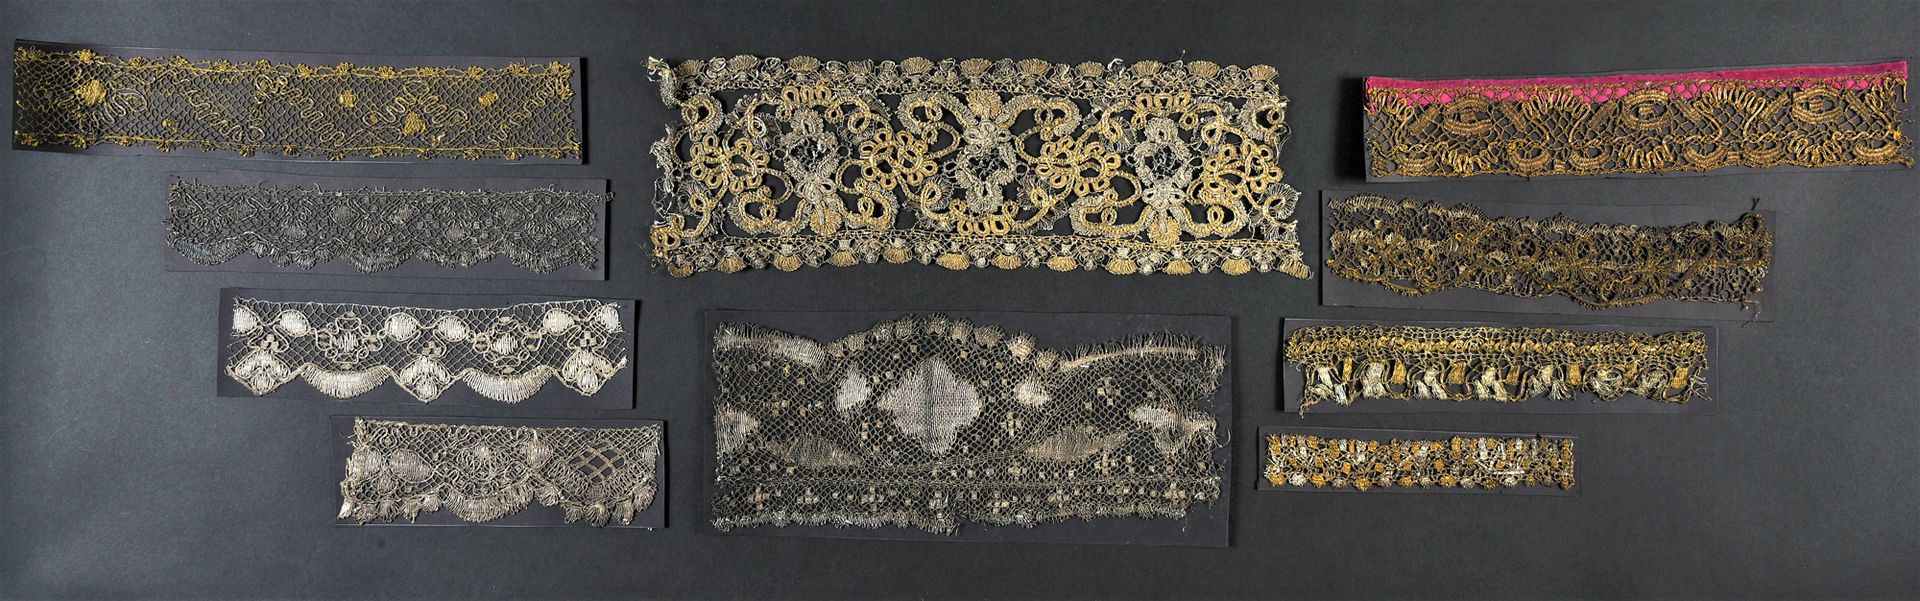 Null Documents in metallic lace, bobbins, 2nd half of the 17th and 18th century.&hellip;